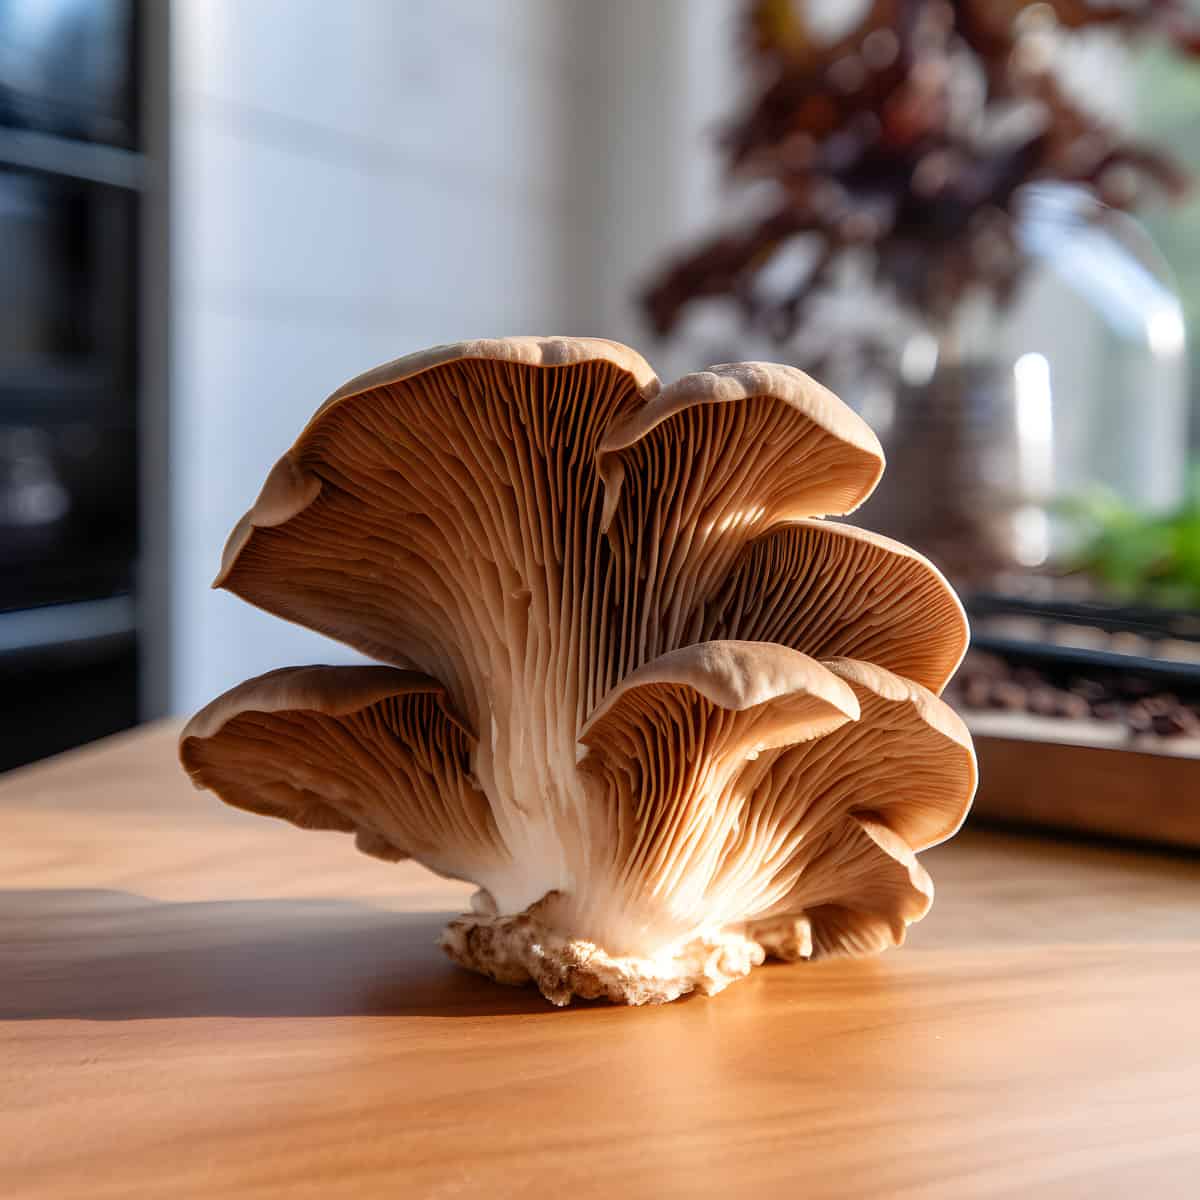 Wood Ear Mushrooms on a kitchen counter